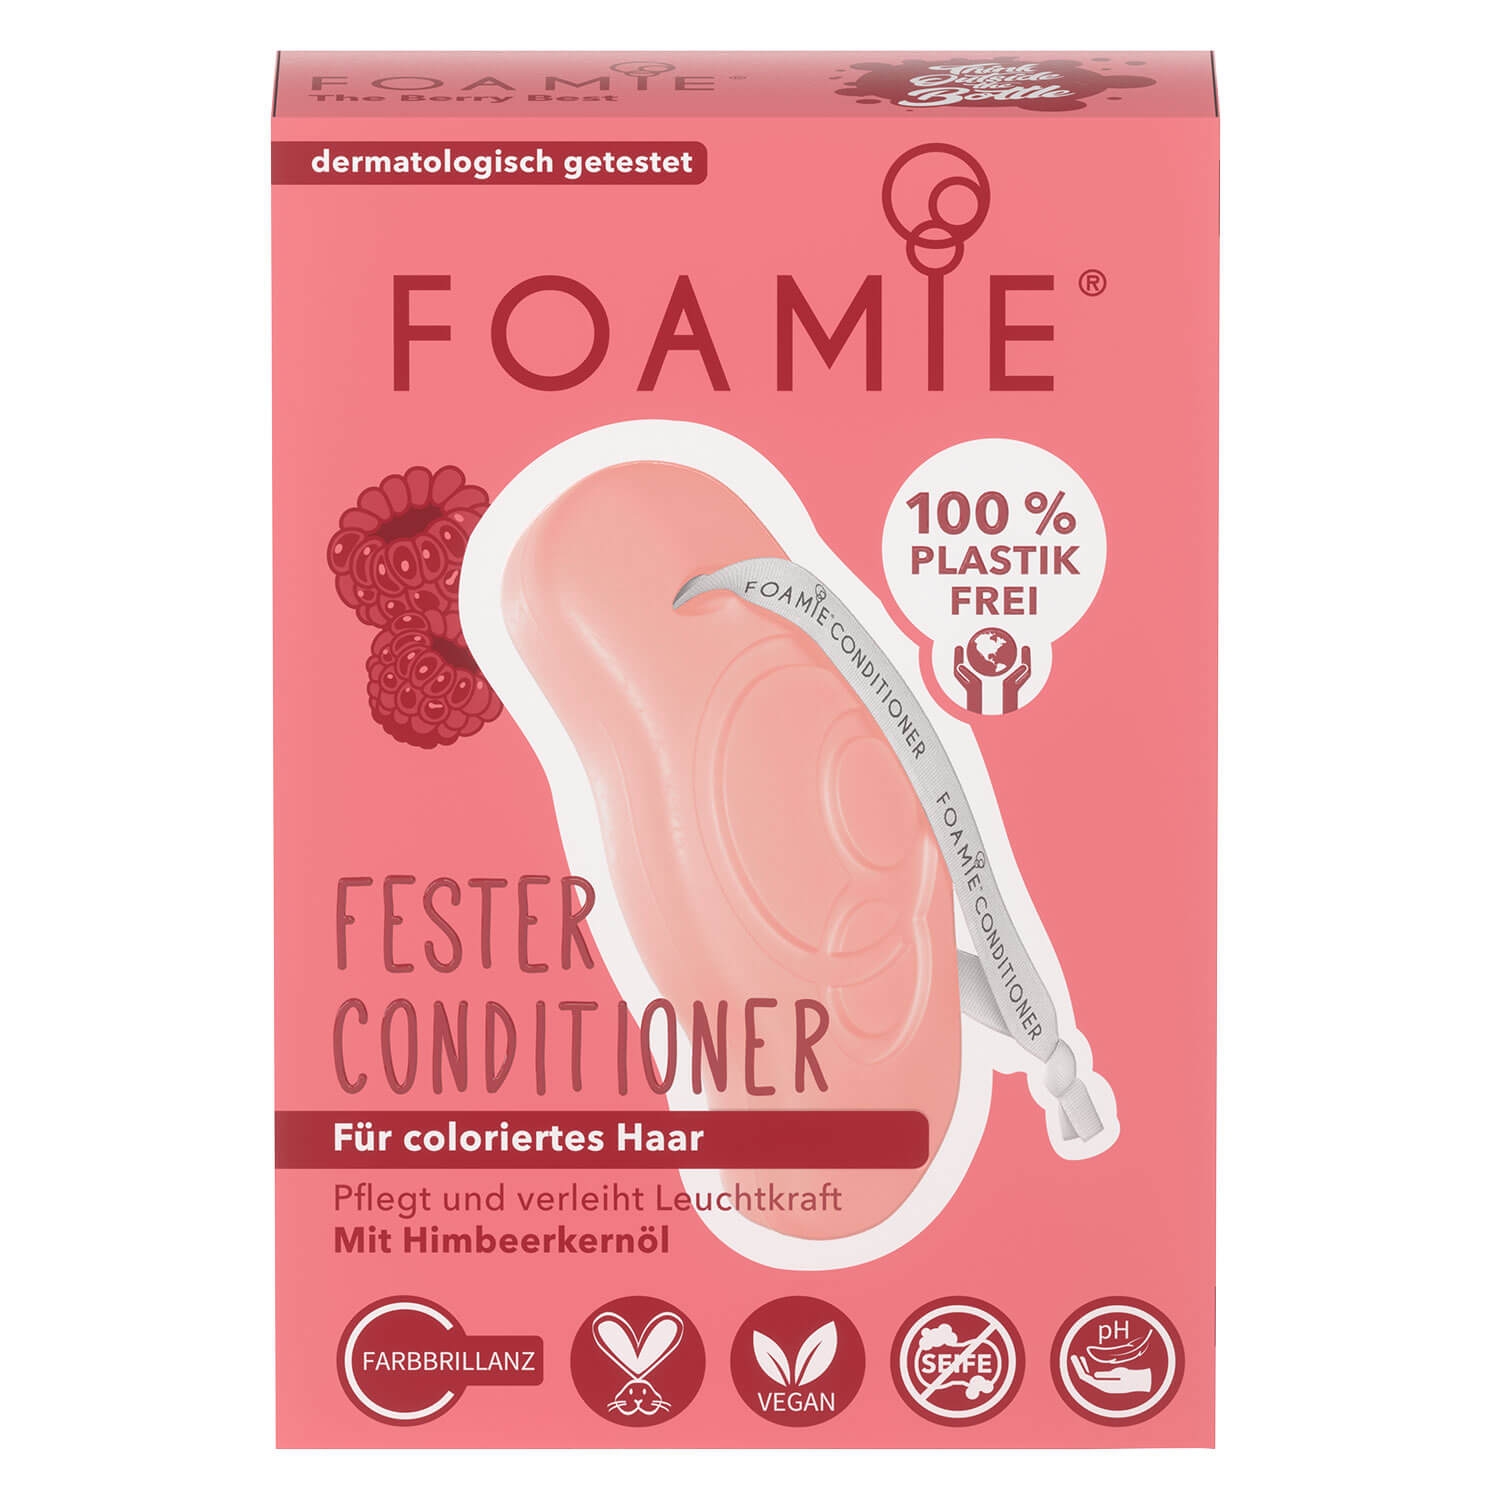 Product image from Foamie - Fester Conditioner The Berry Best